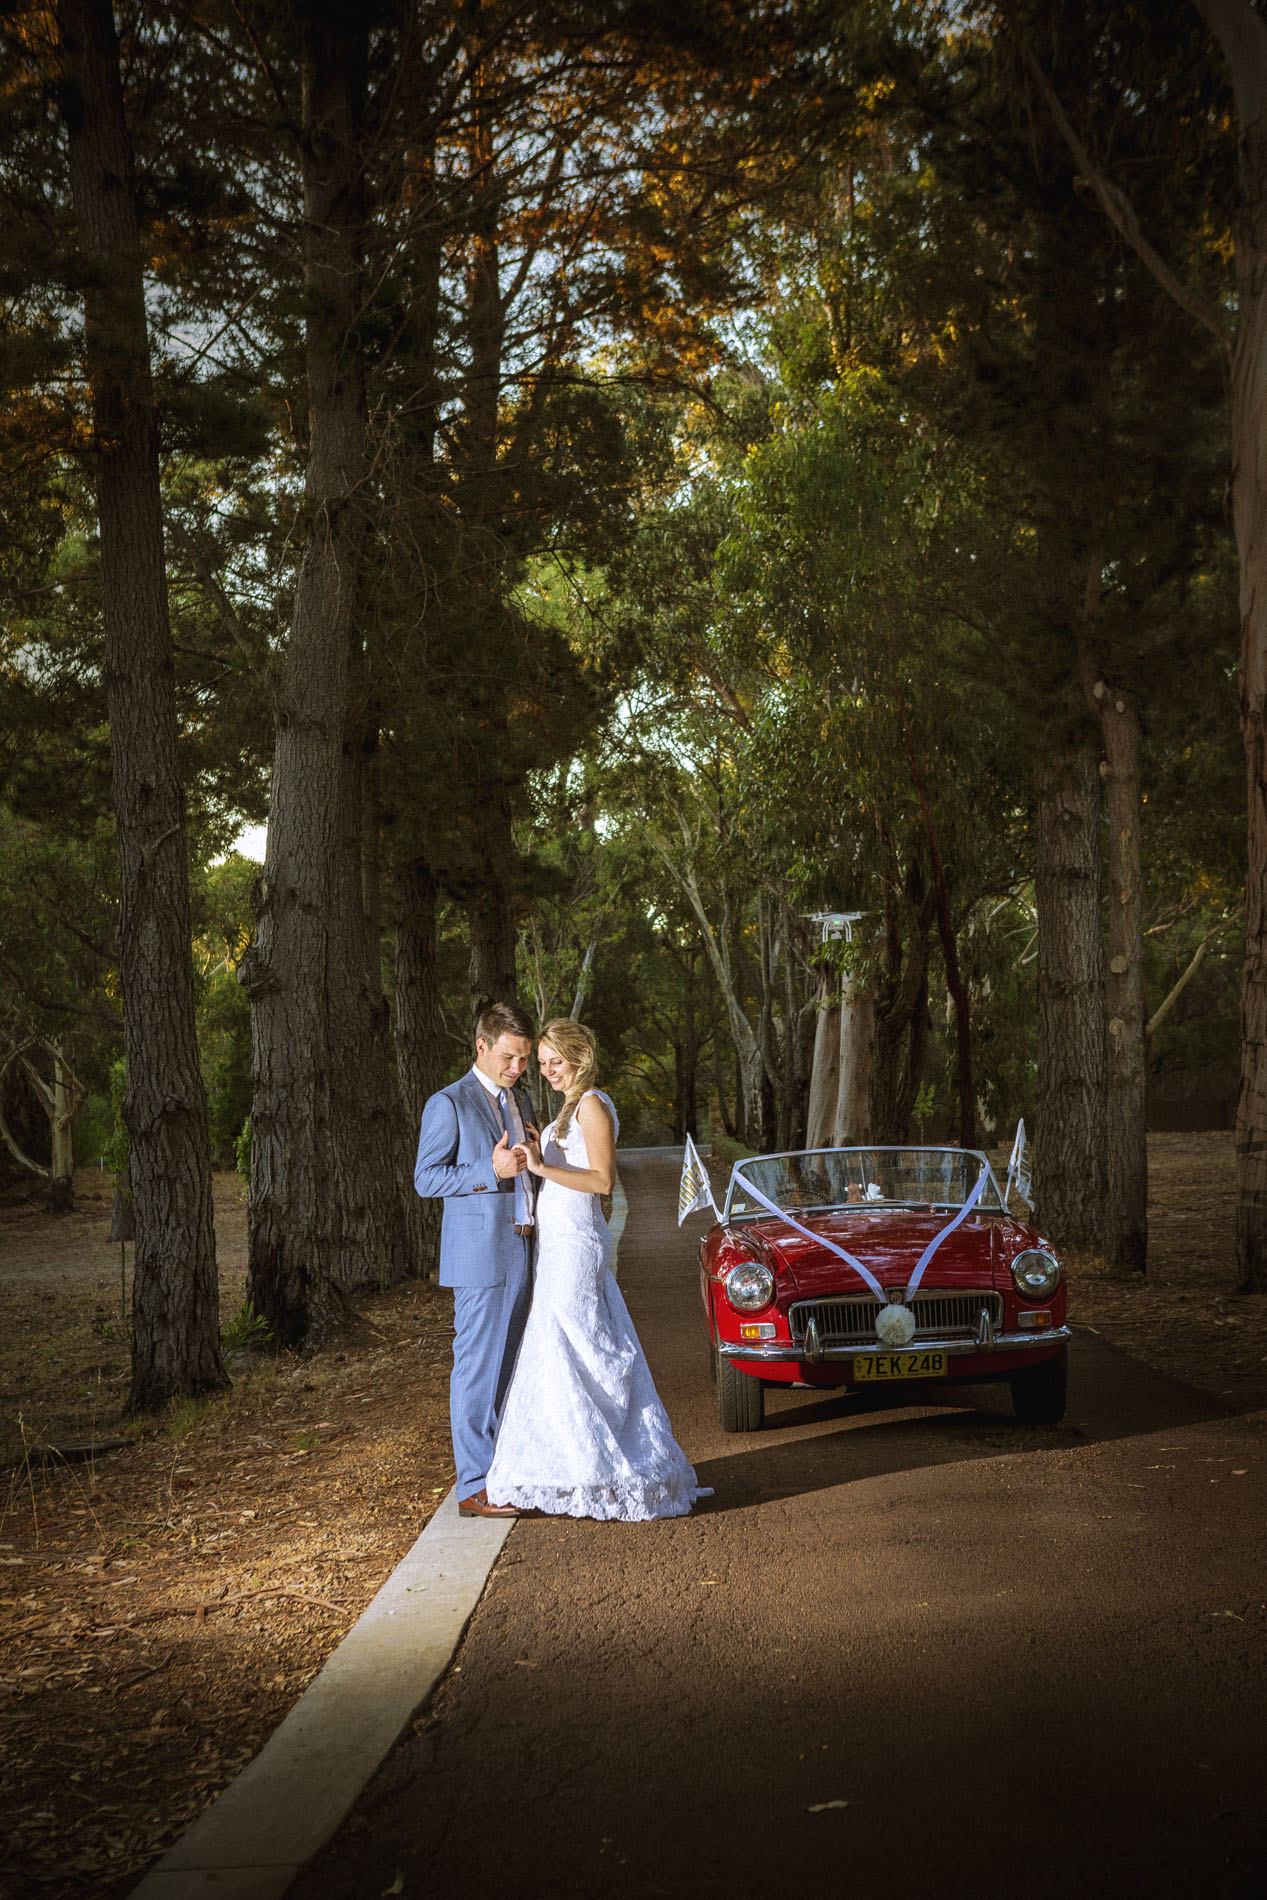 wedding packages are available in Perth and the South west